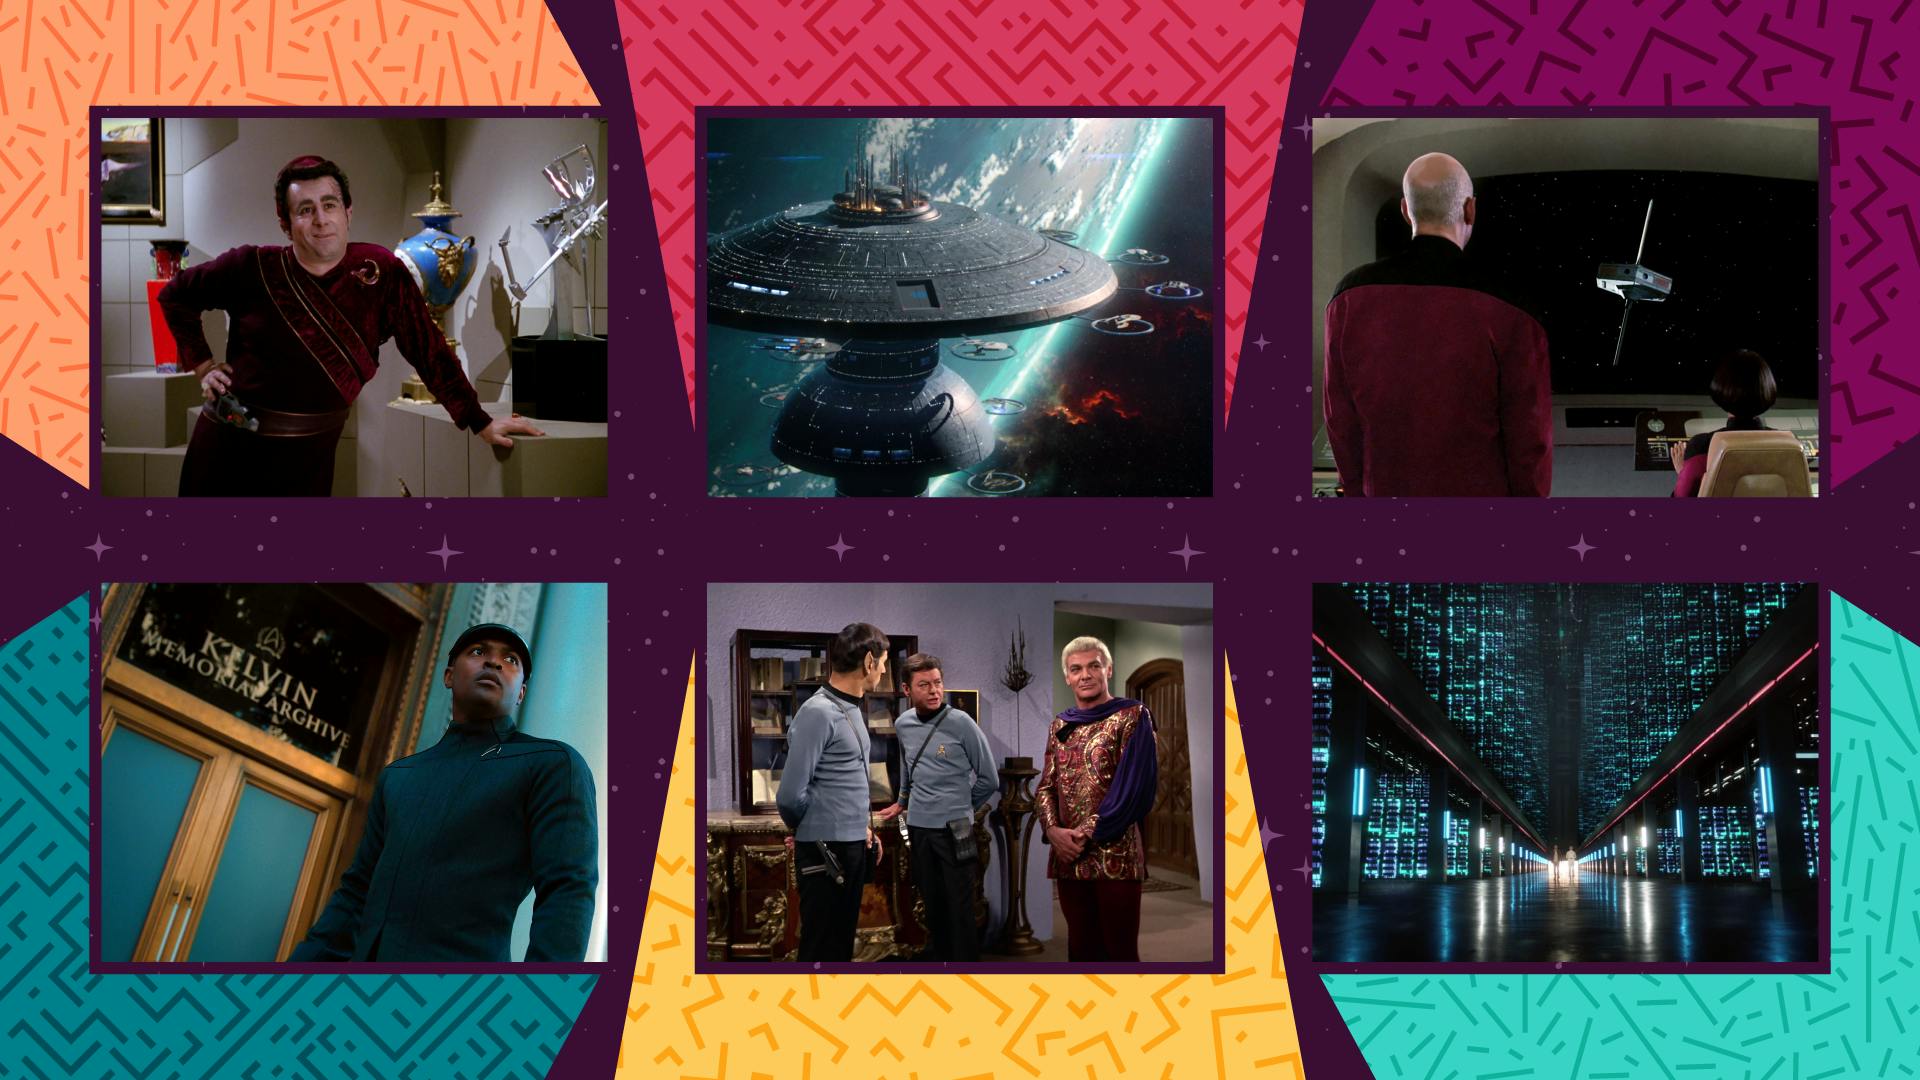 Collage of Star Trek's libraries and archives episodic stills